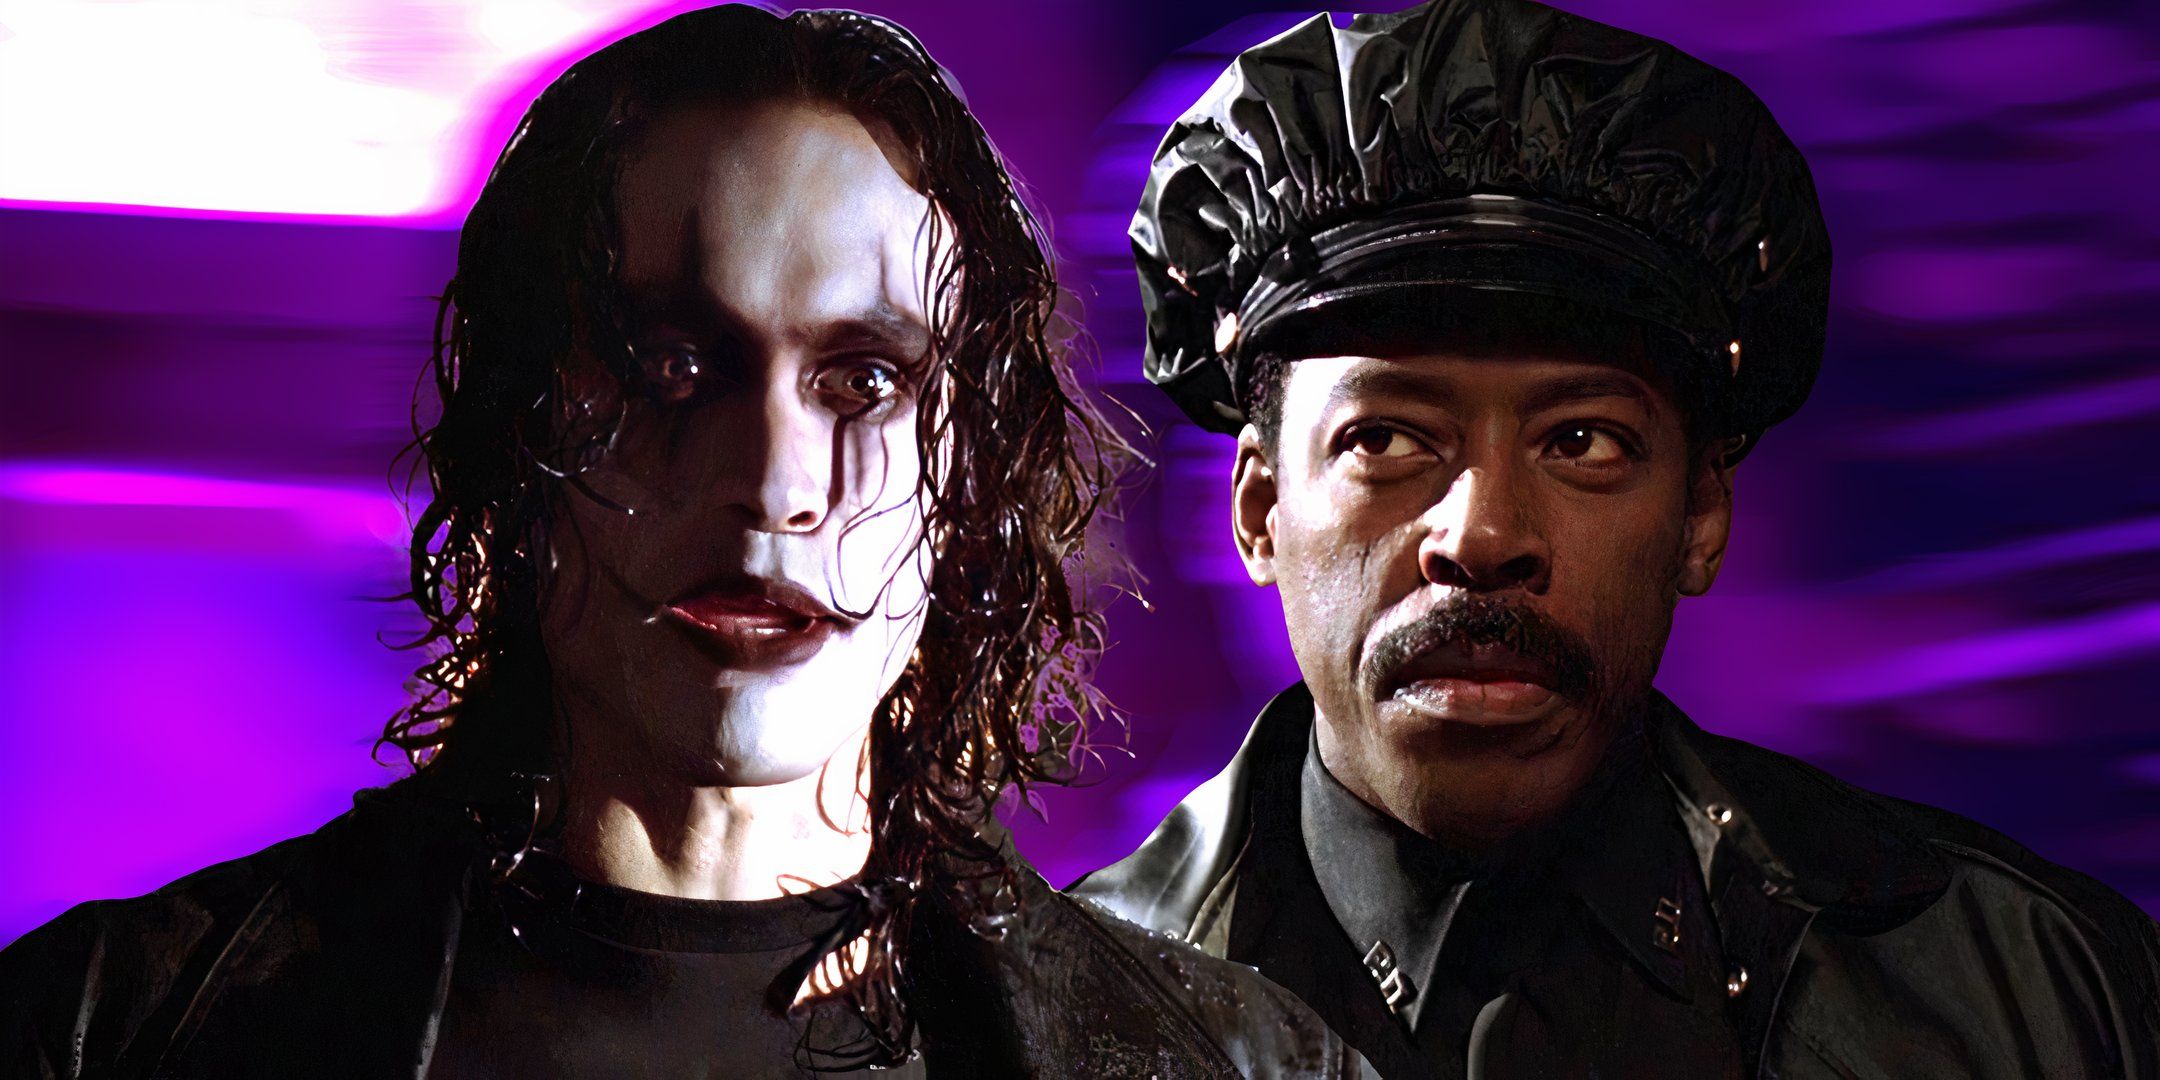 Brandon Lee as Eric looking at a determined Ernie Hudson in The Crow